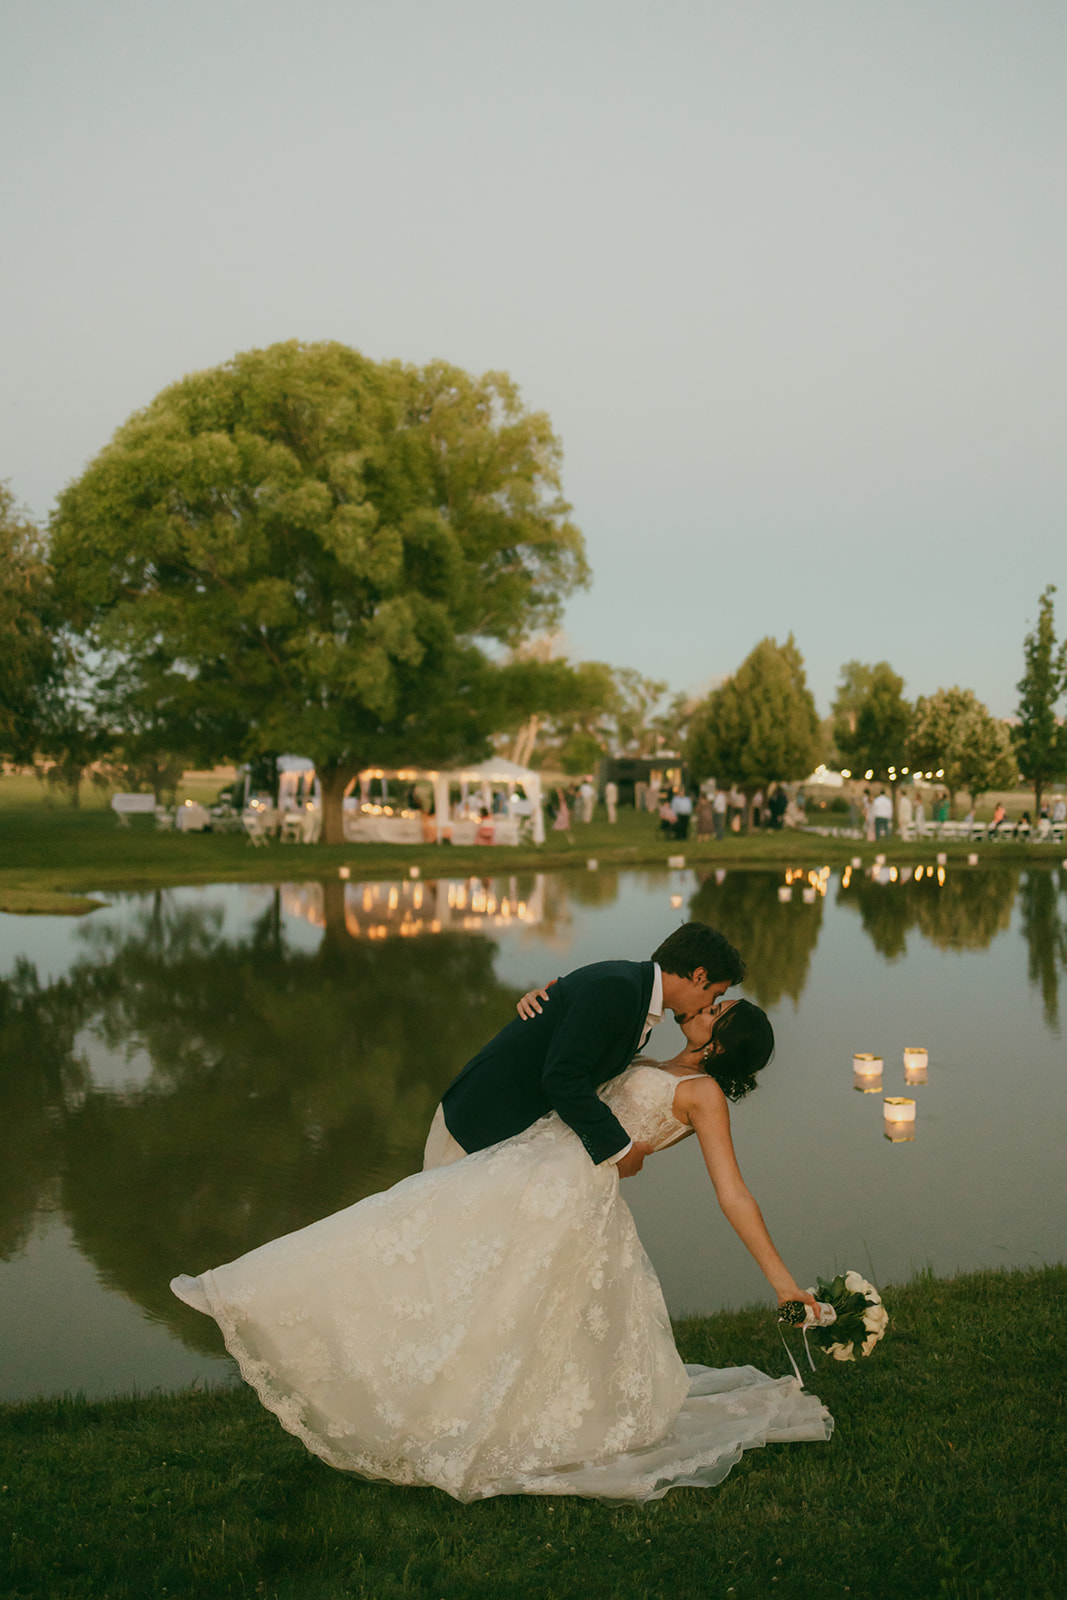 Married couple kissing in front of a pond at sunset with twinkly lights in the background